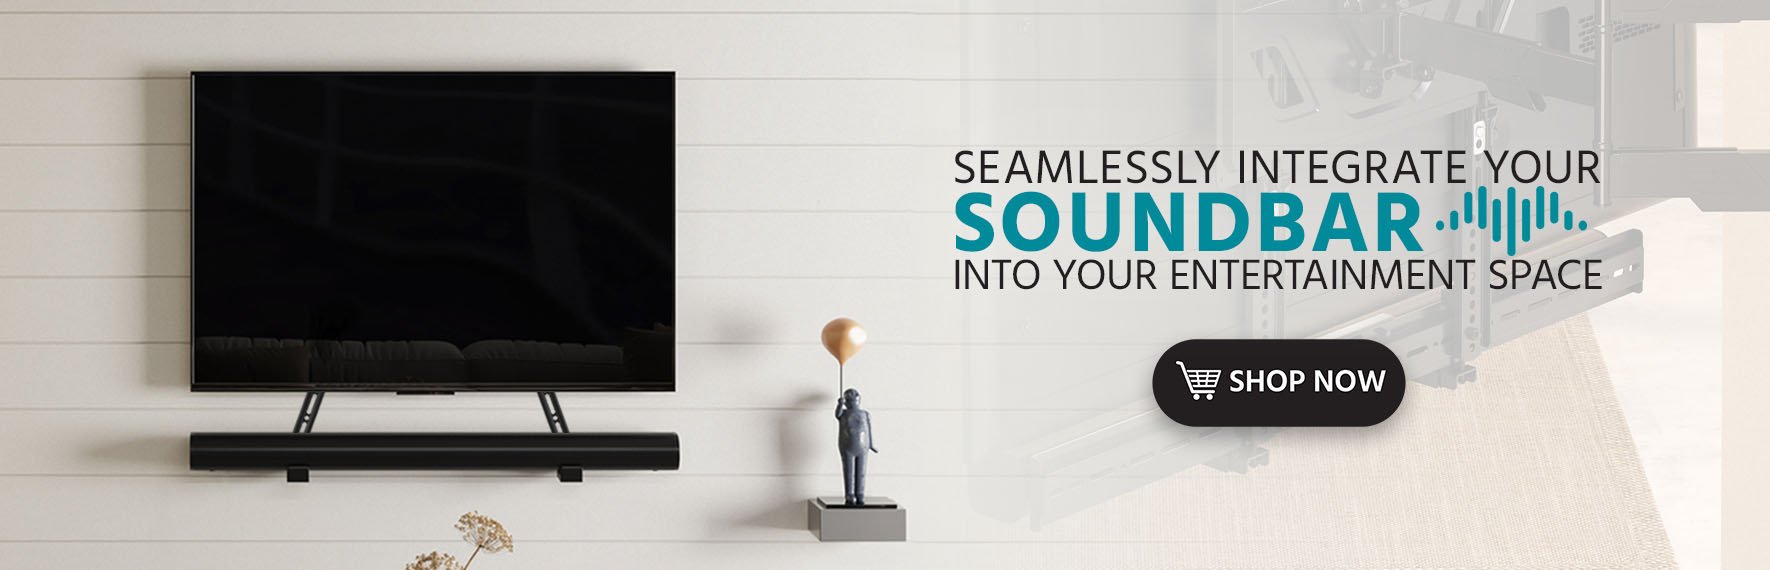 Seamlessly integrate your soundbar into your entertainment space Free Standard US Shipping Shop Now